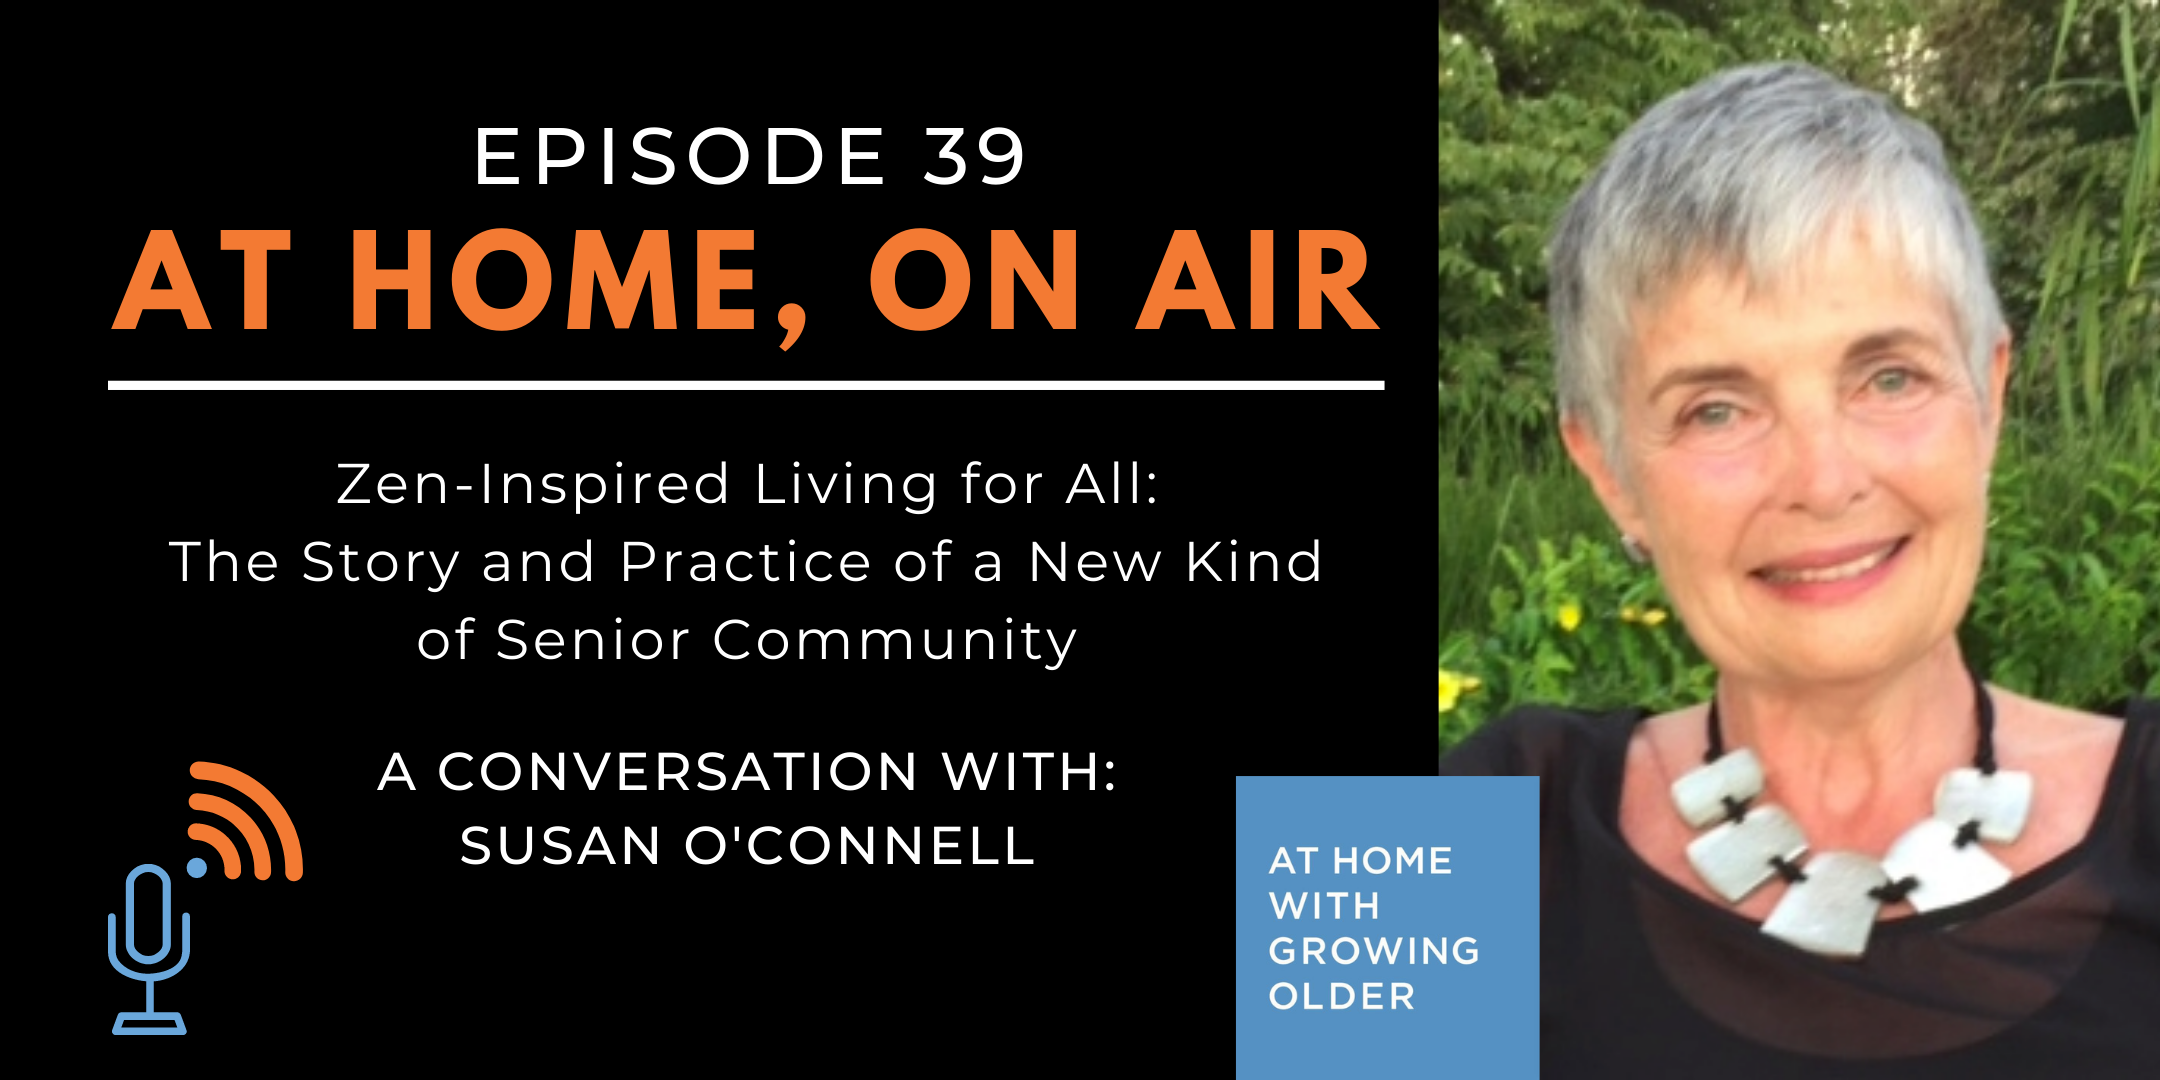 At Home, On Air:  A Conversation with Susan O’Connell